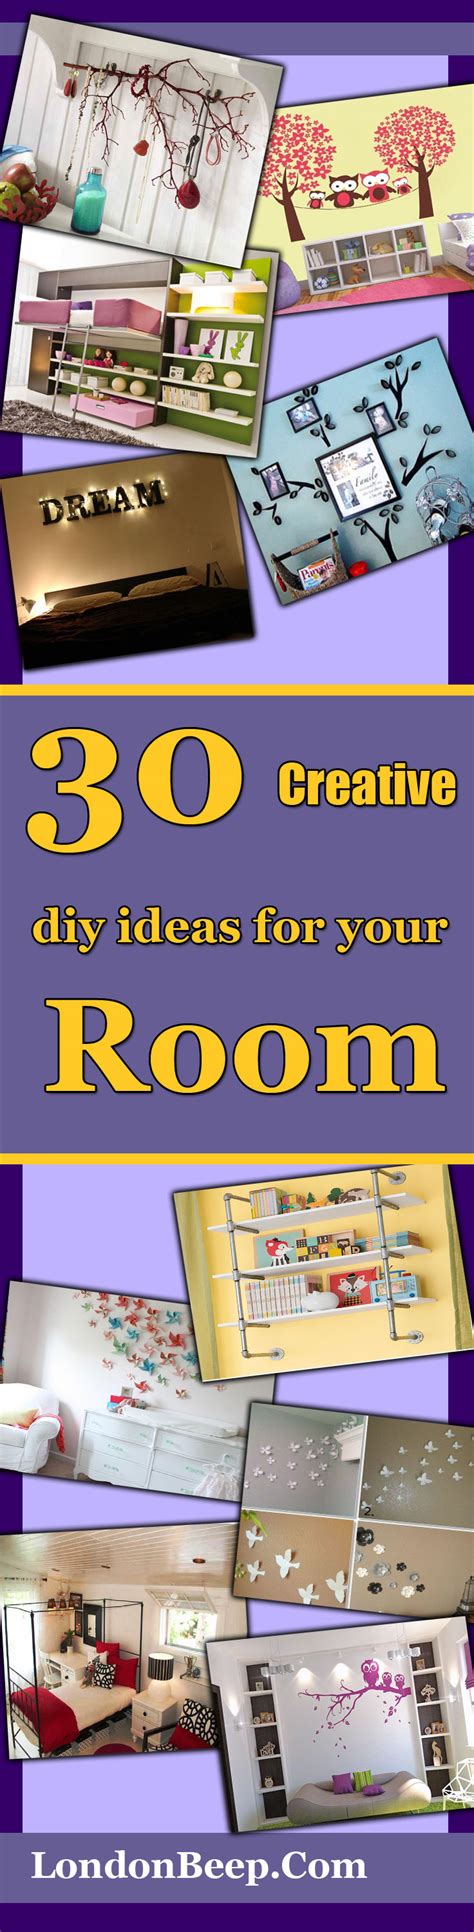 Do You Want To Decorate Your Room In A Creative Way London Beep Share